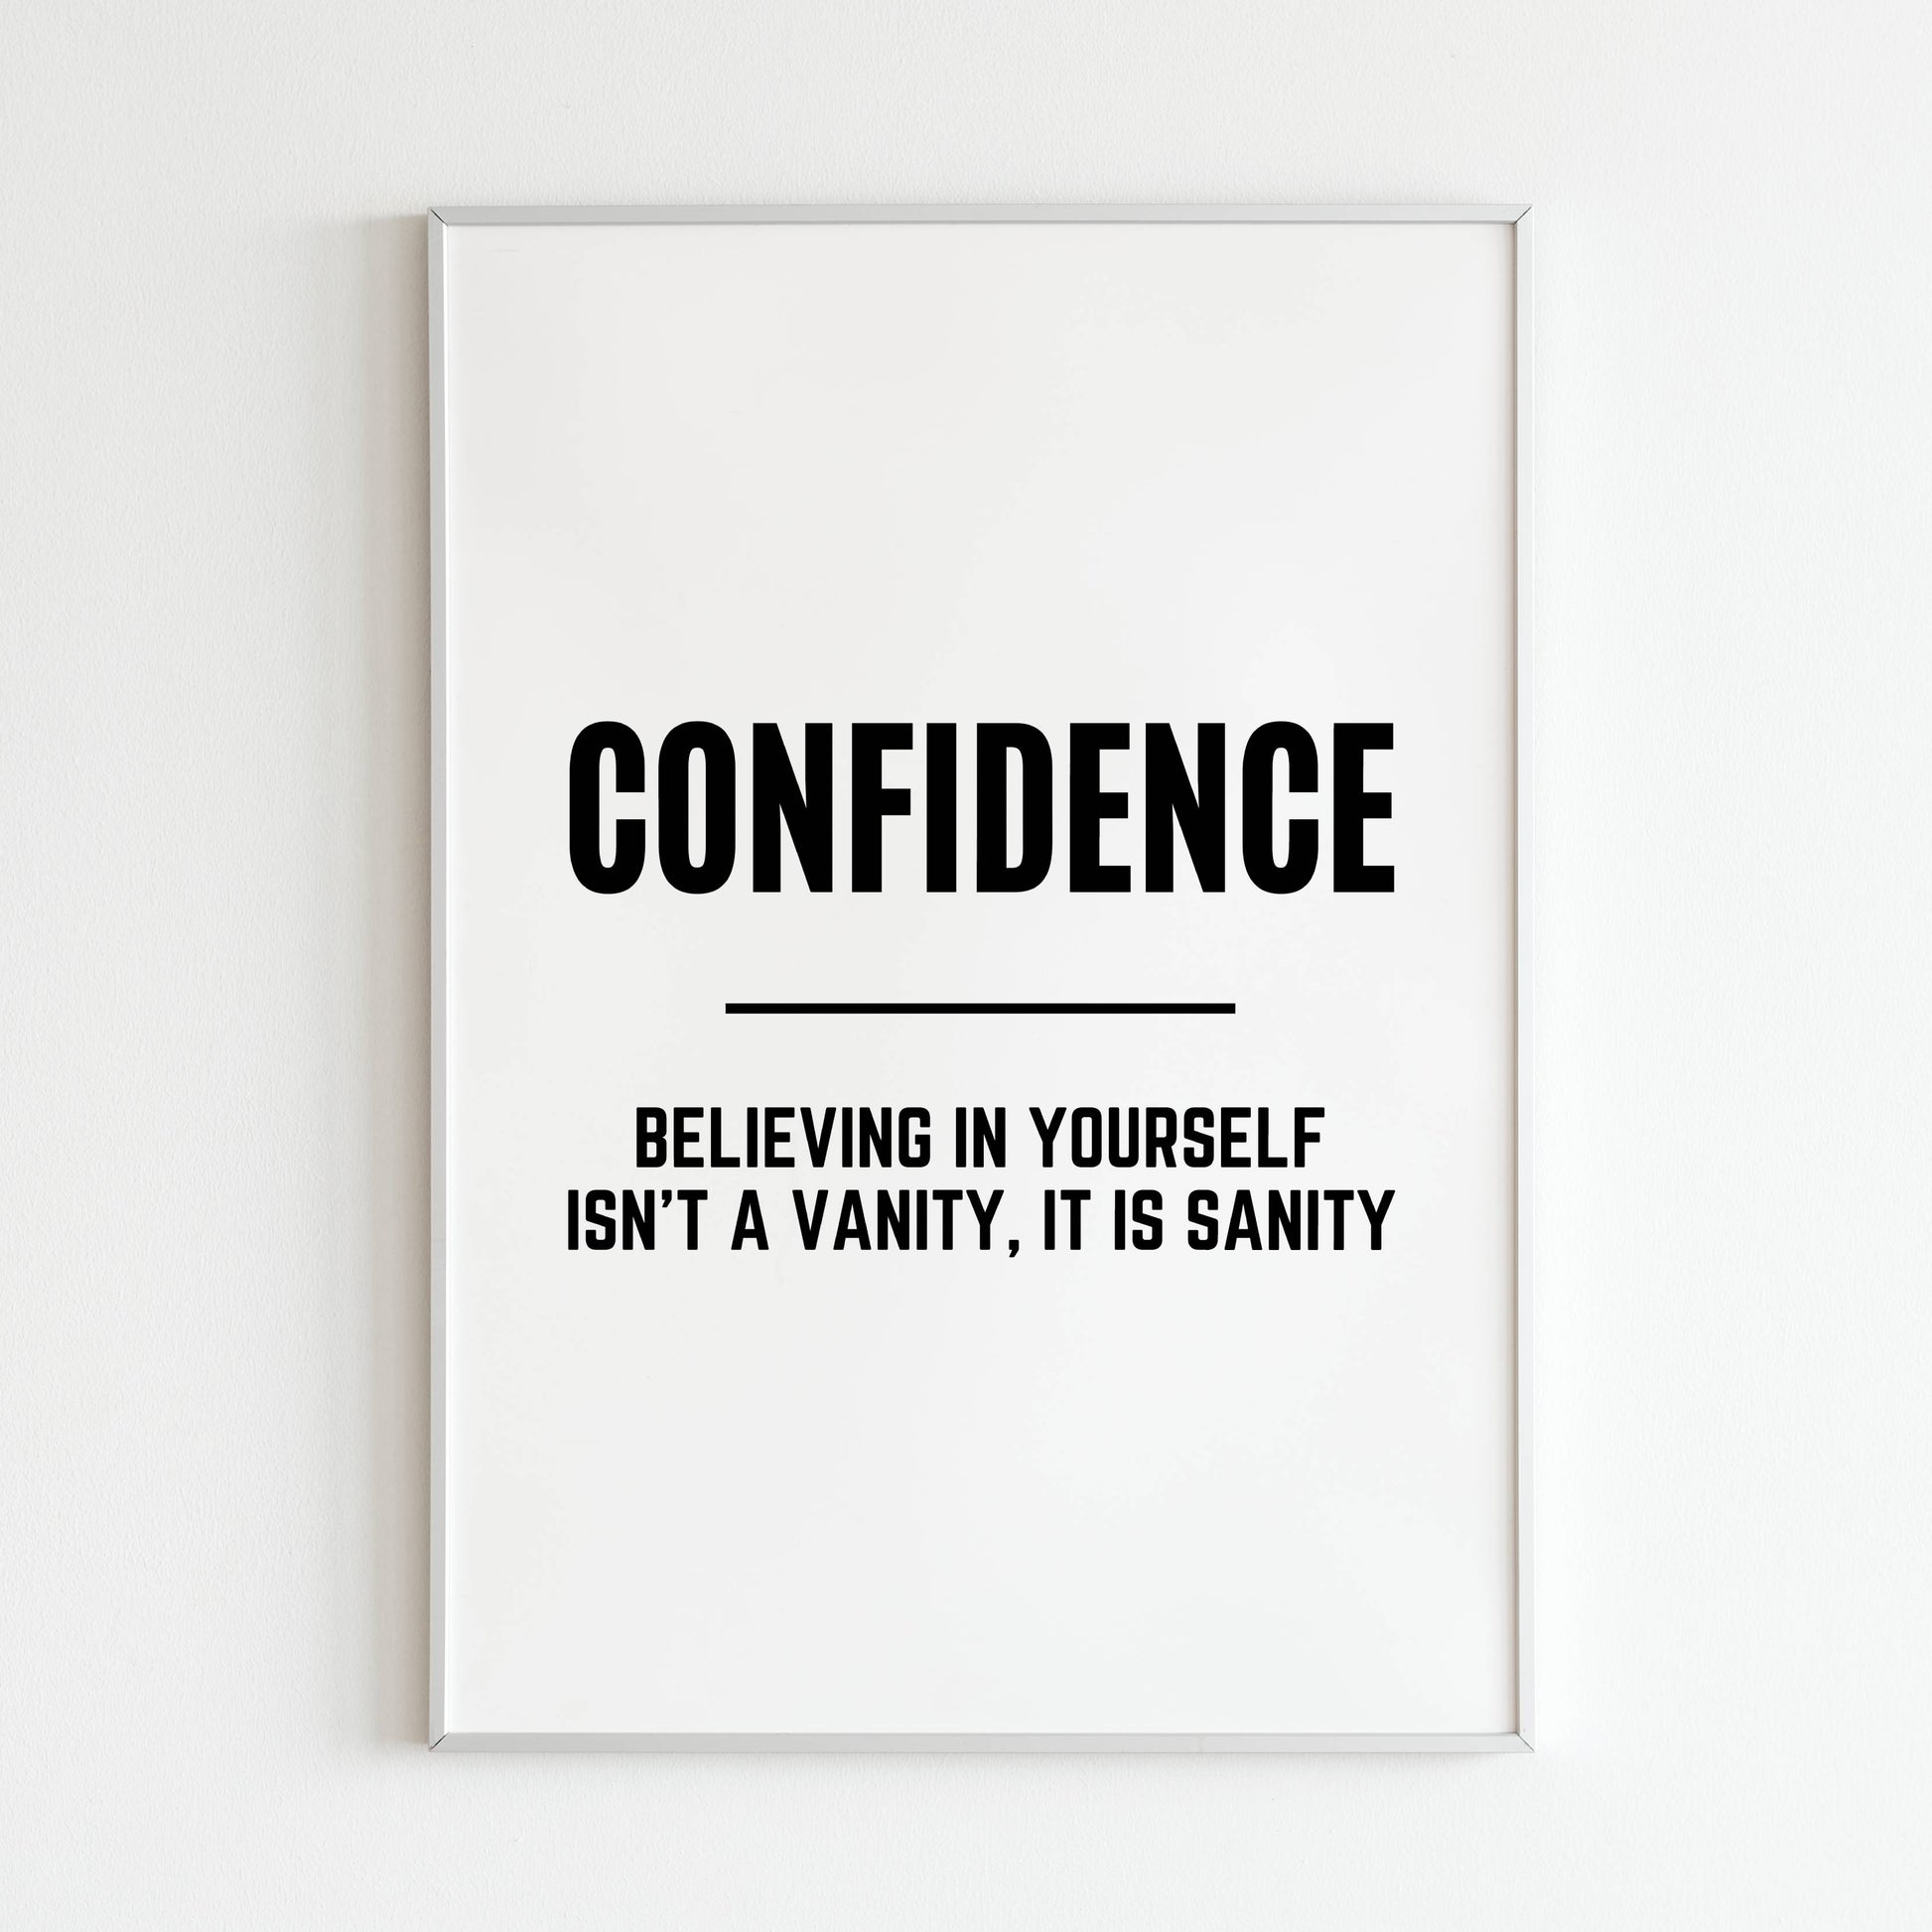 Downloadable "Confidence meaning" art print to define confidence.